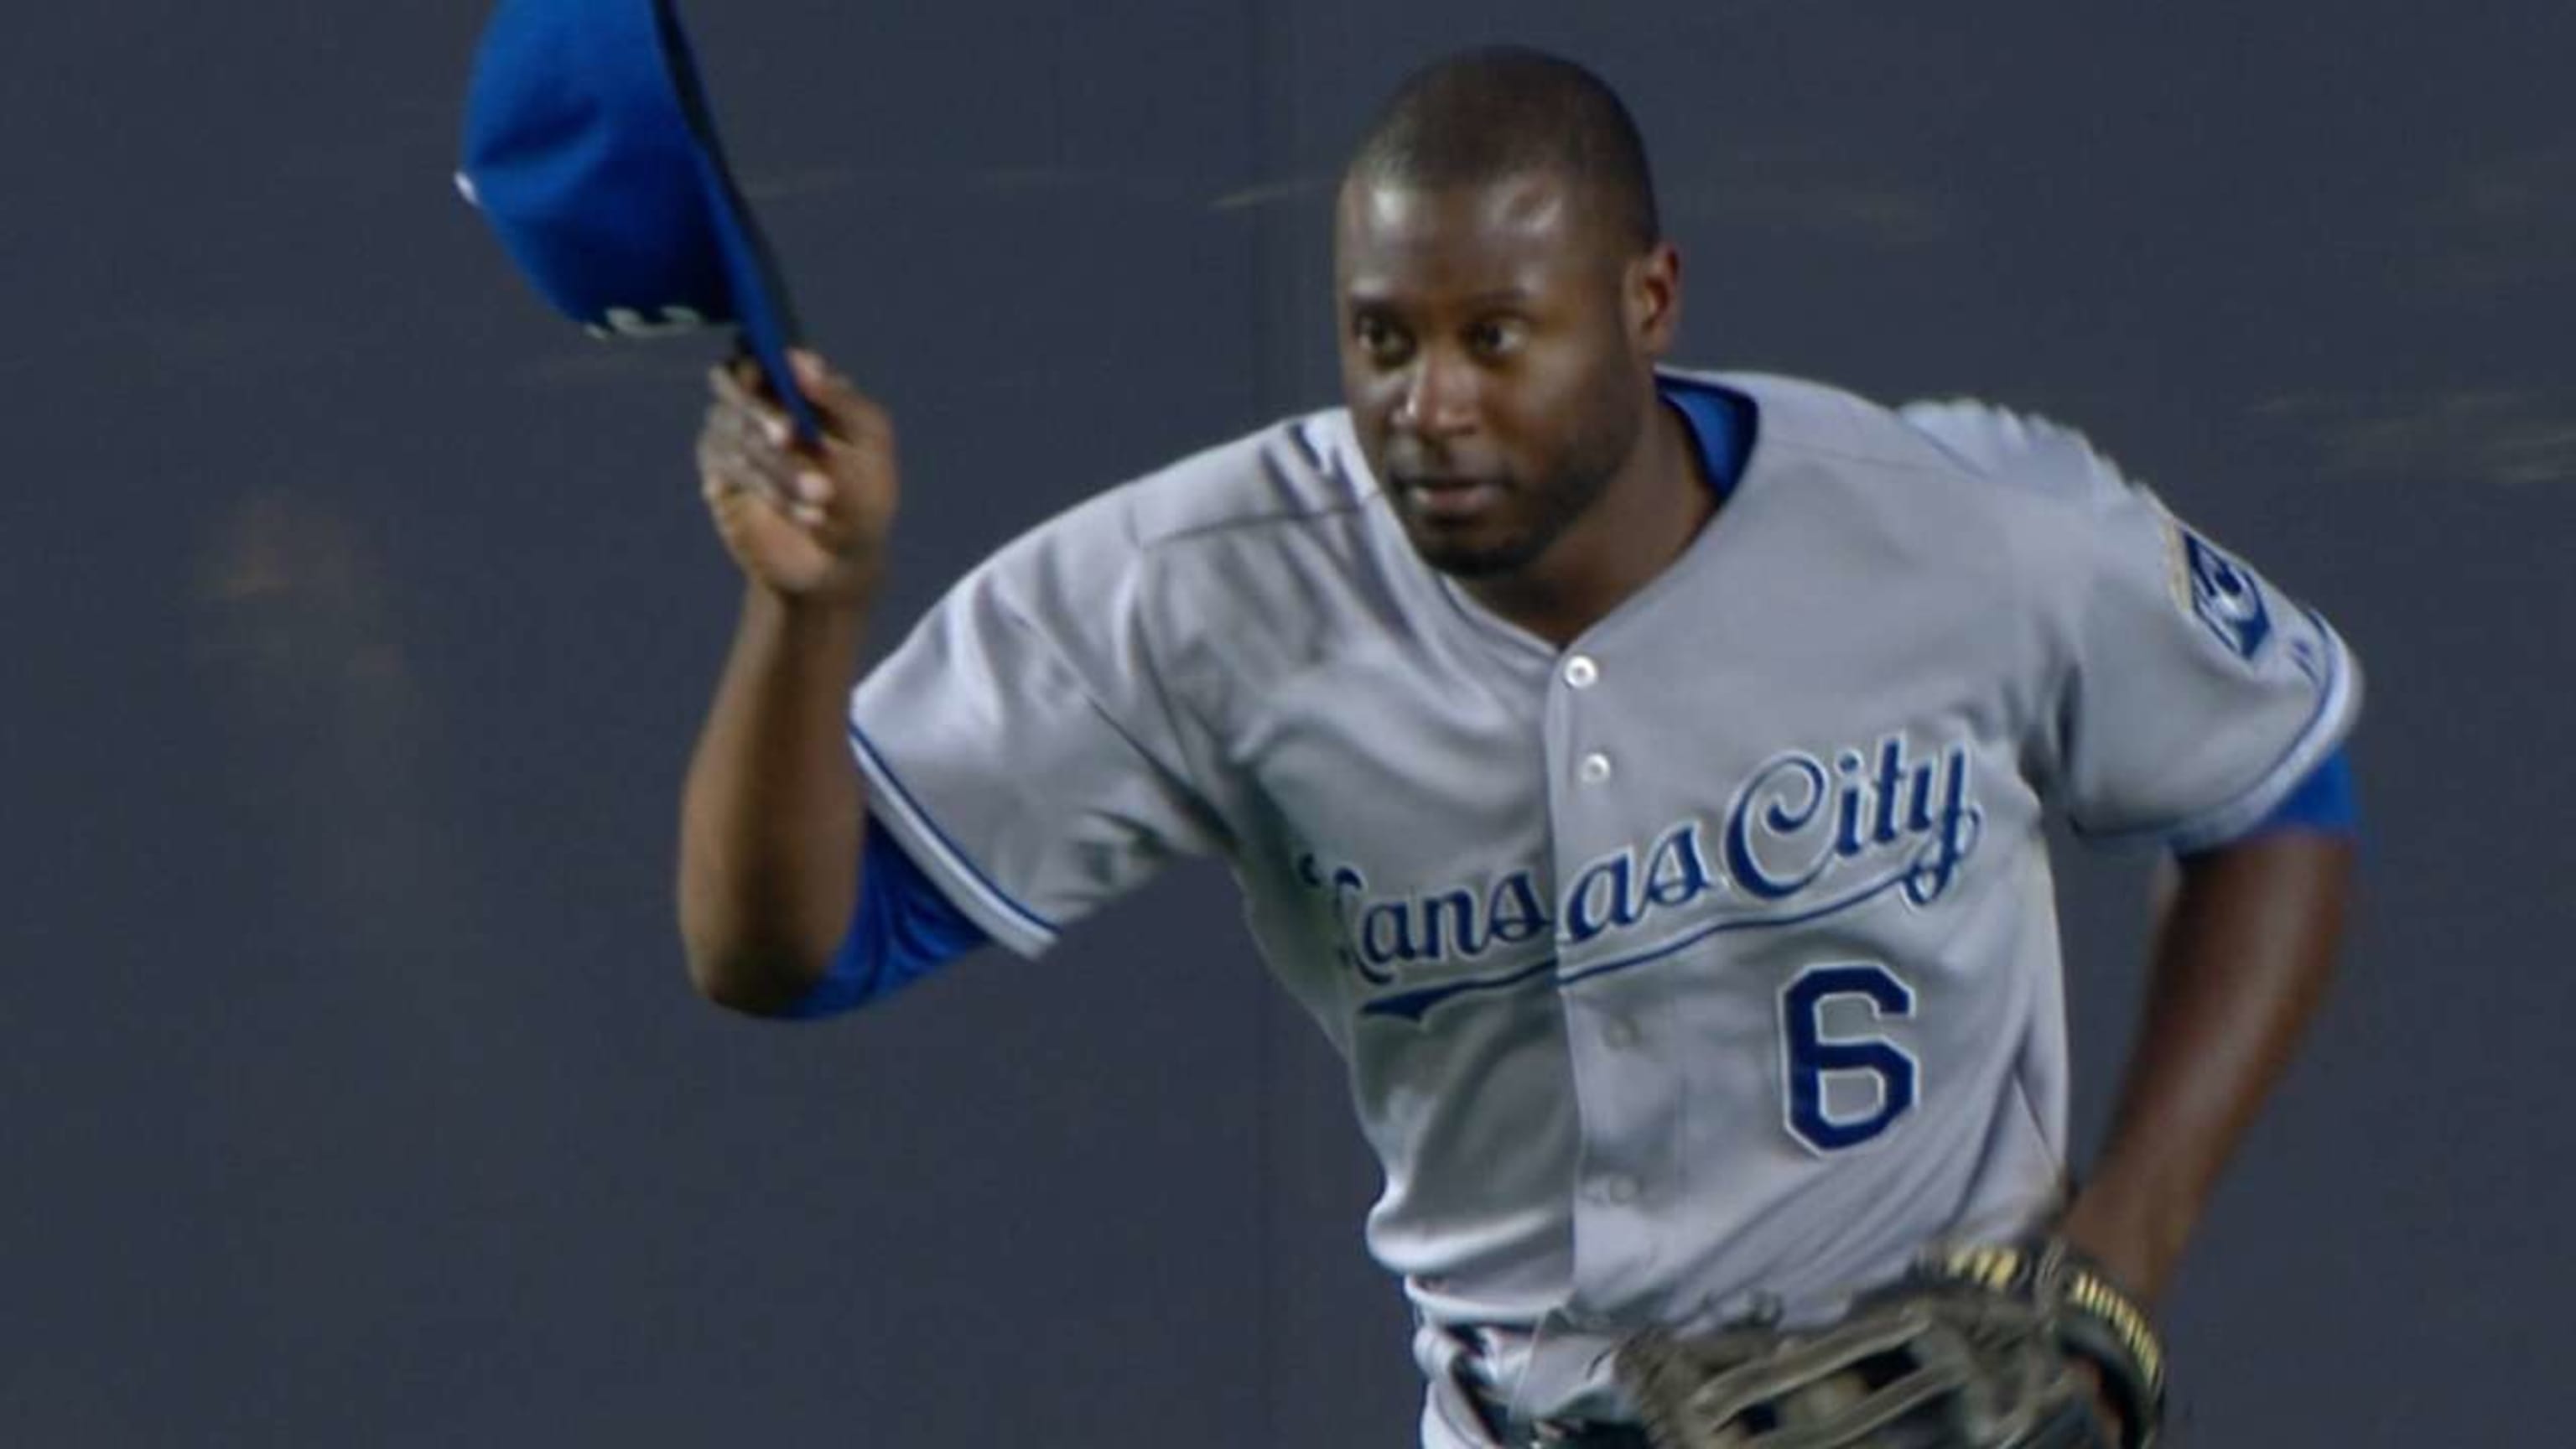 Lorenzo Cain to retire as Royal, rejected other offers